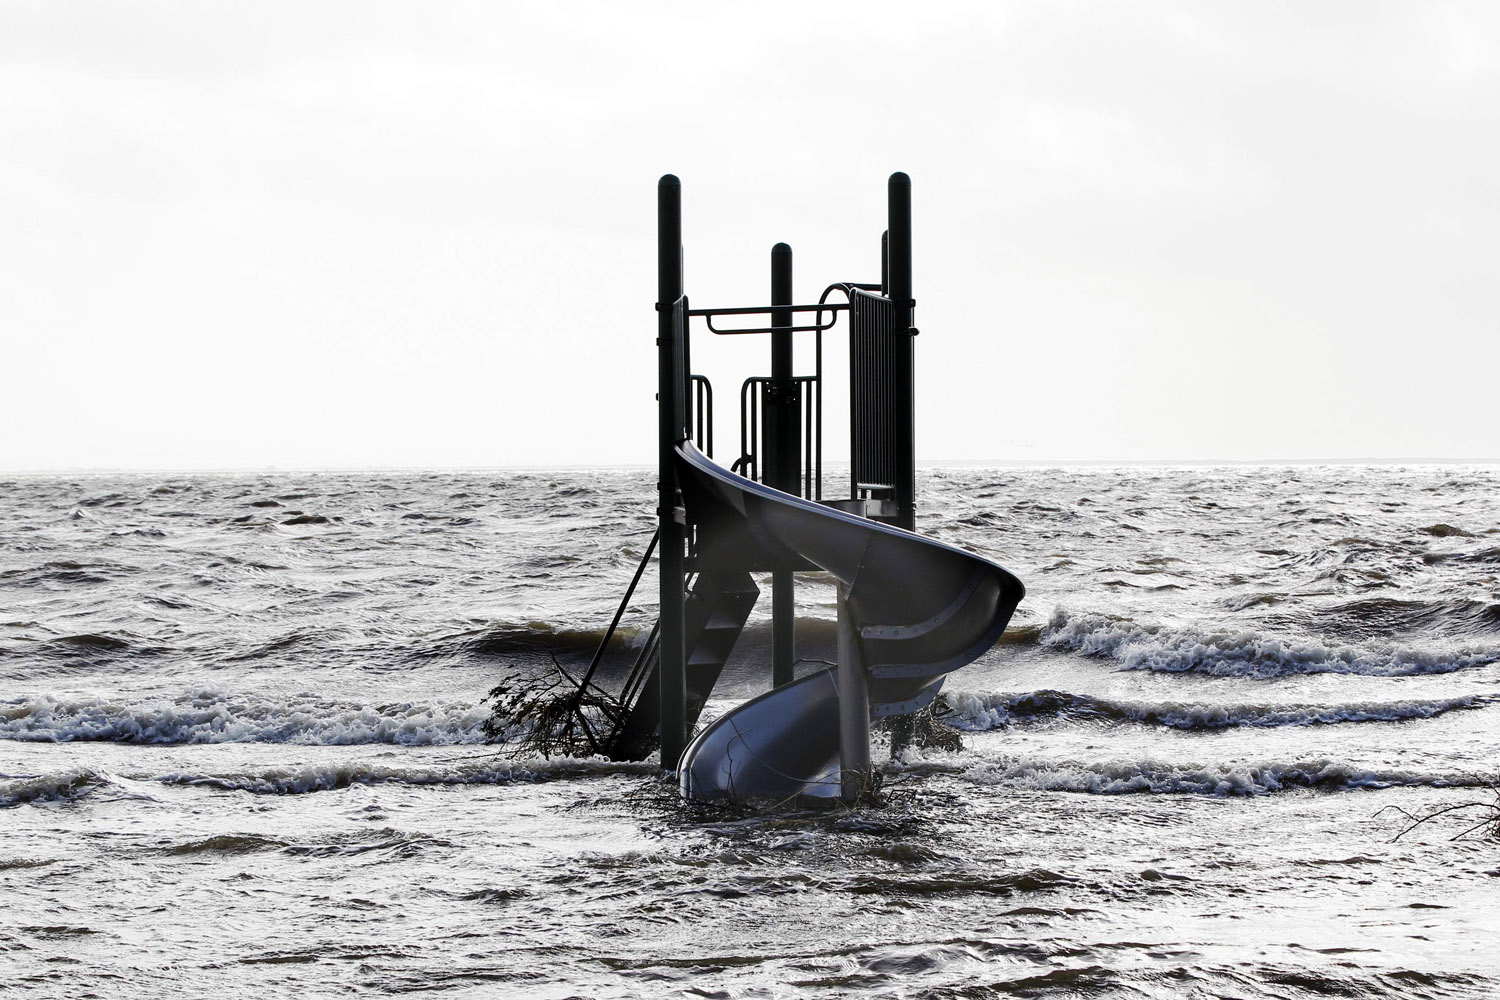 Image: Oct. 30, 2012. A playground stands surrounded by water pushed up by Hurricane Sandy in Bellport, New York.